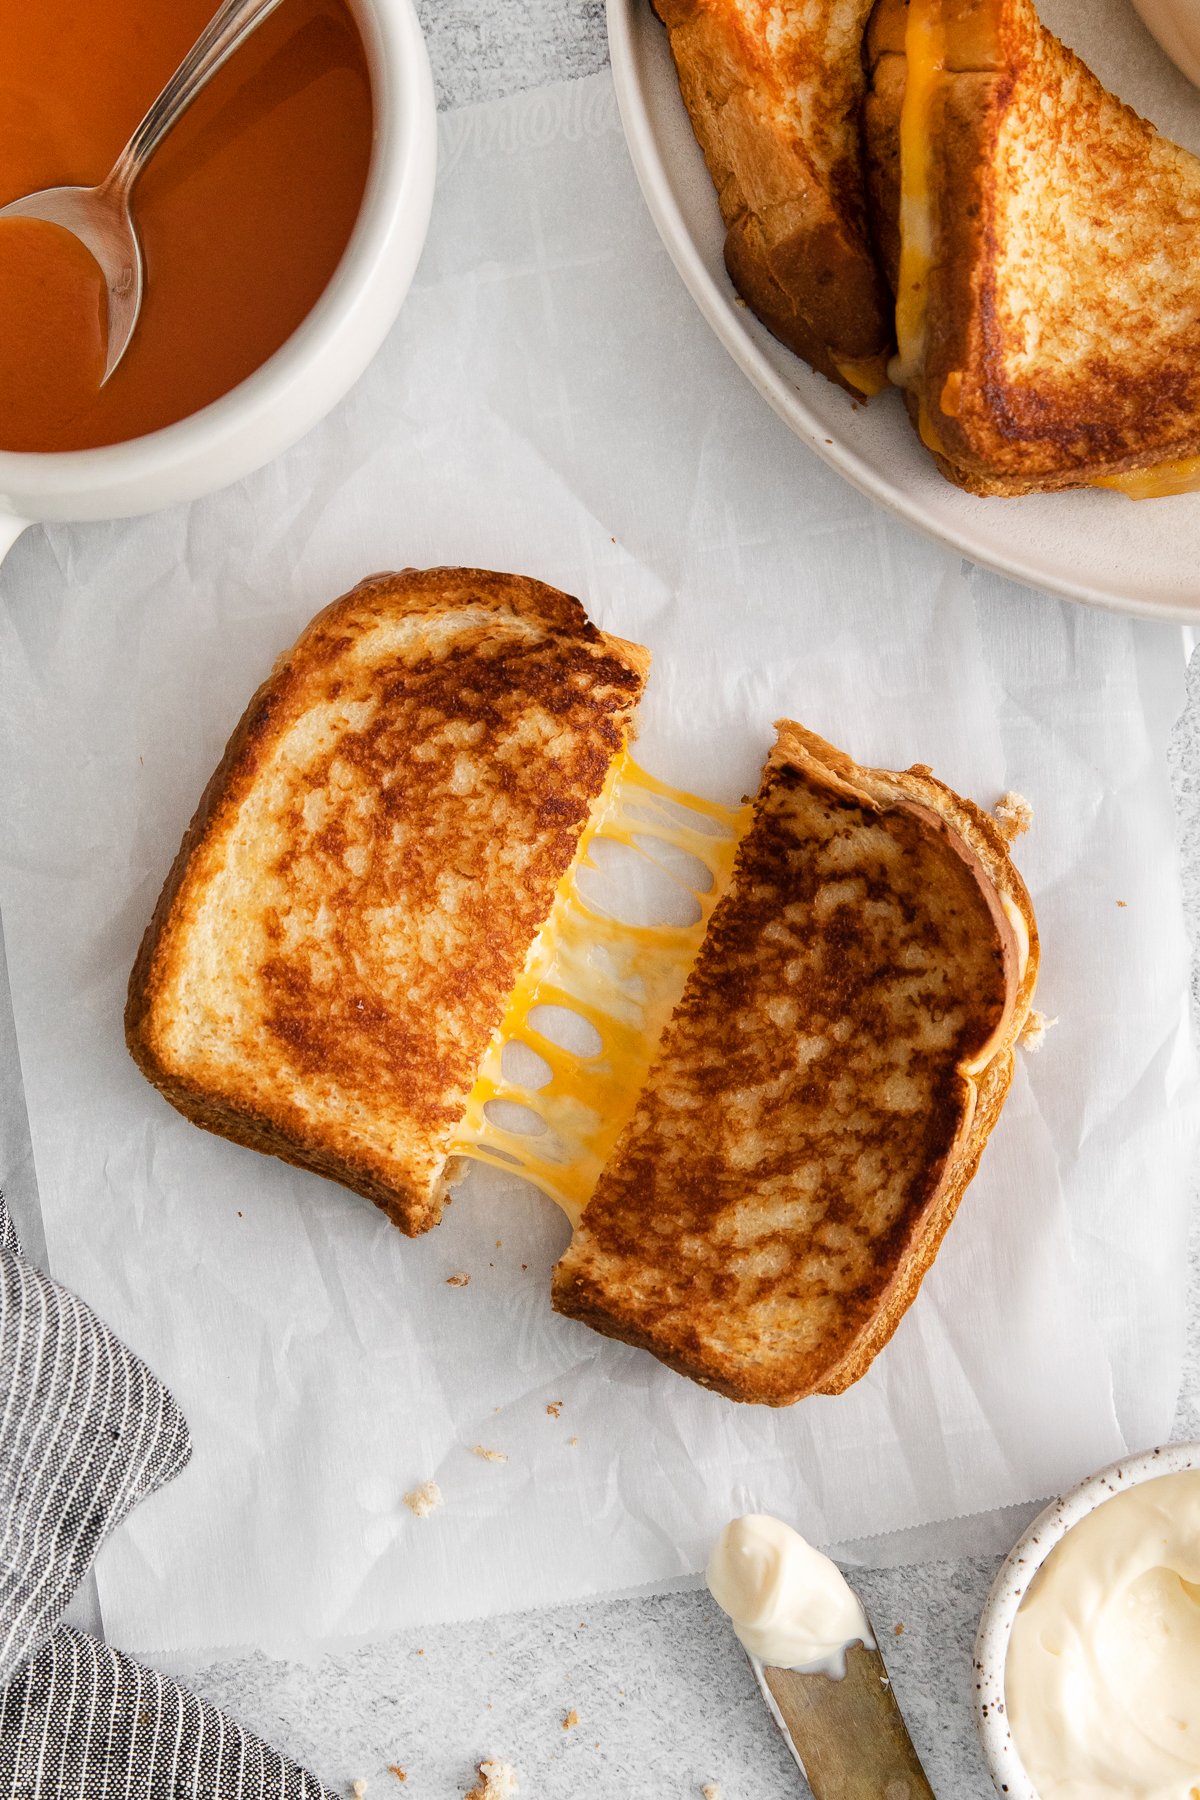 Grilled cheese with mayo cut in half.